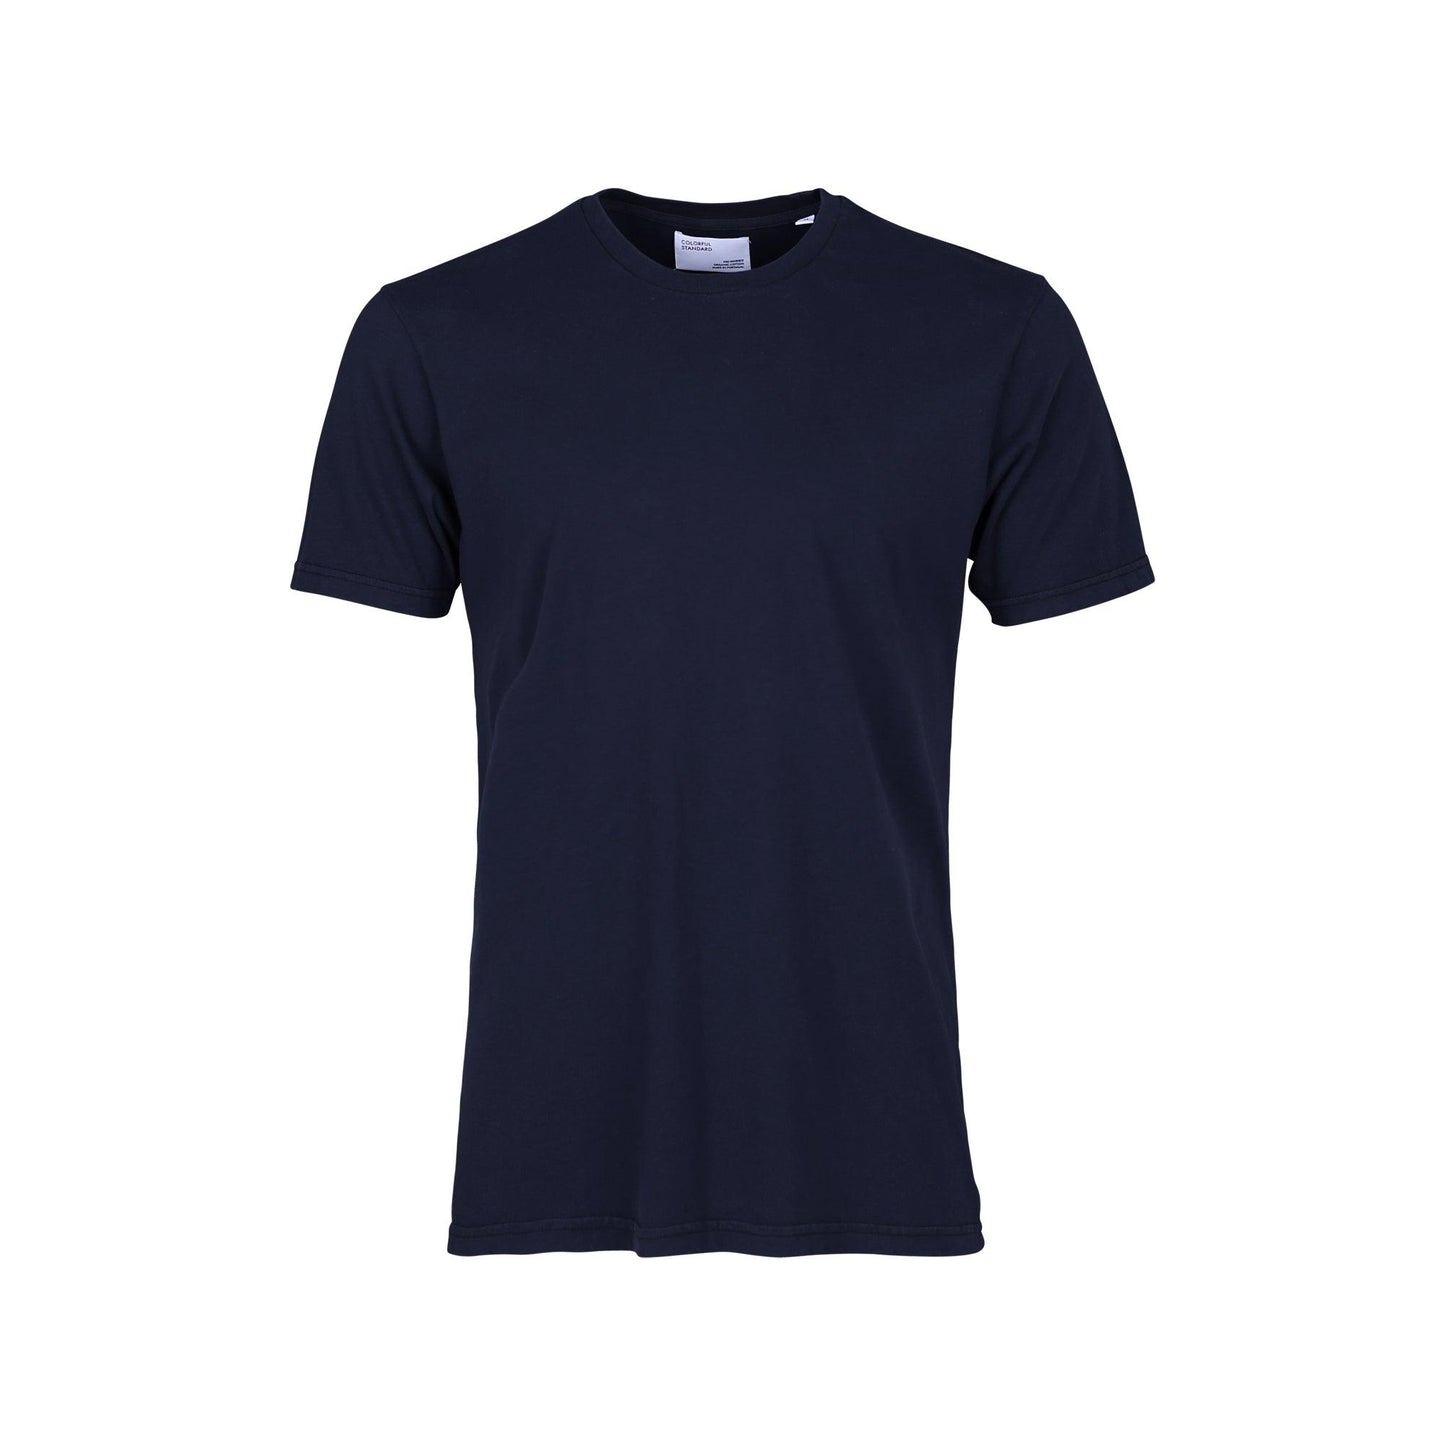 Colorful Standard Classic Organic Tee - Navy Blue - No Generation